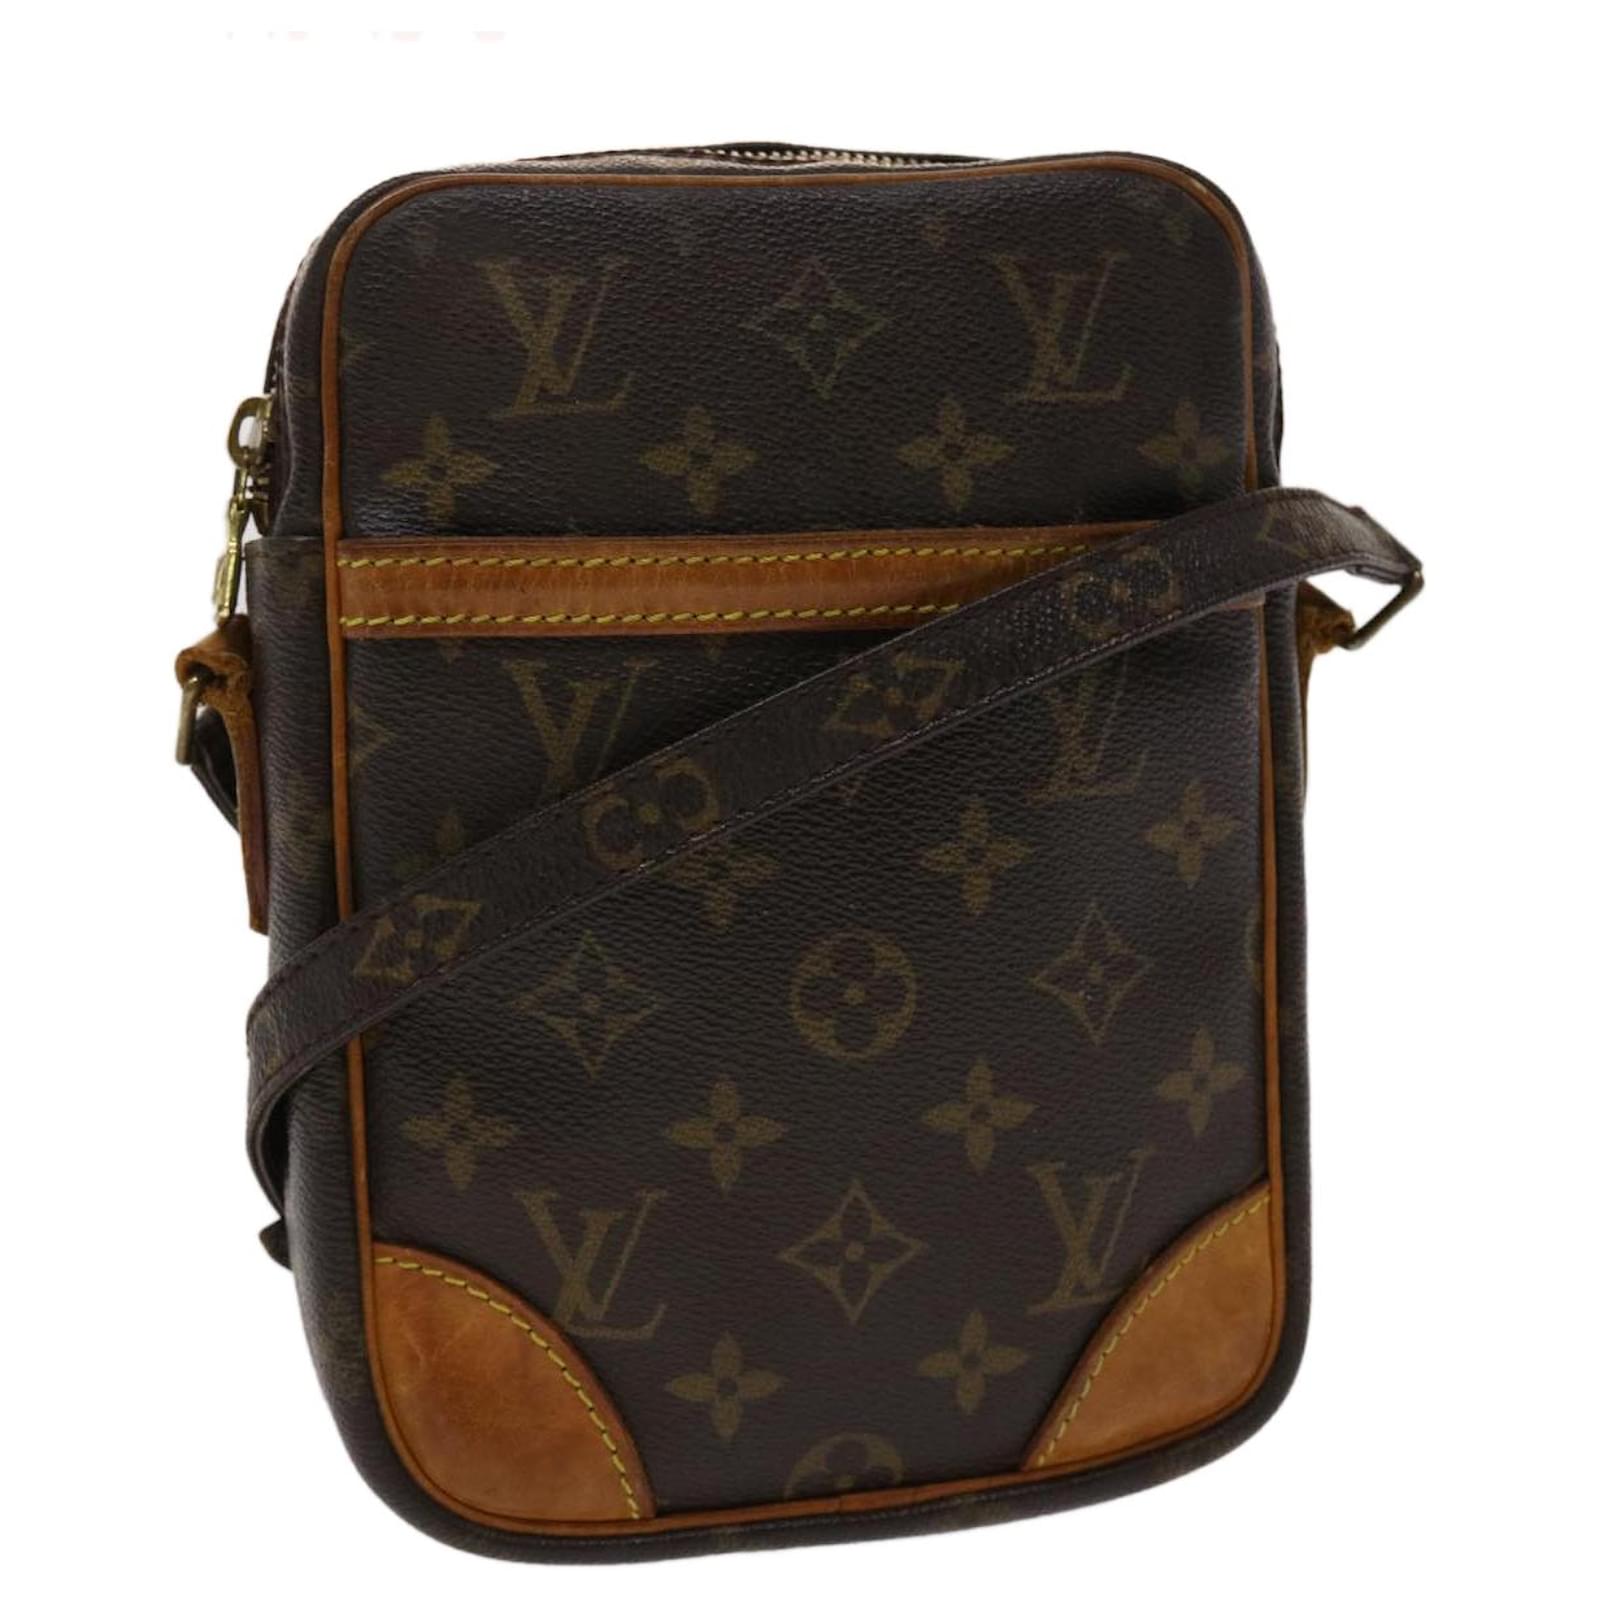 Louis Vuitton Danube Canvas Shoulder Bag (pre-owned) in Gray